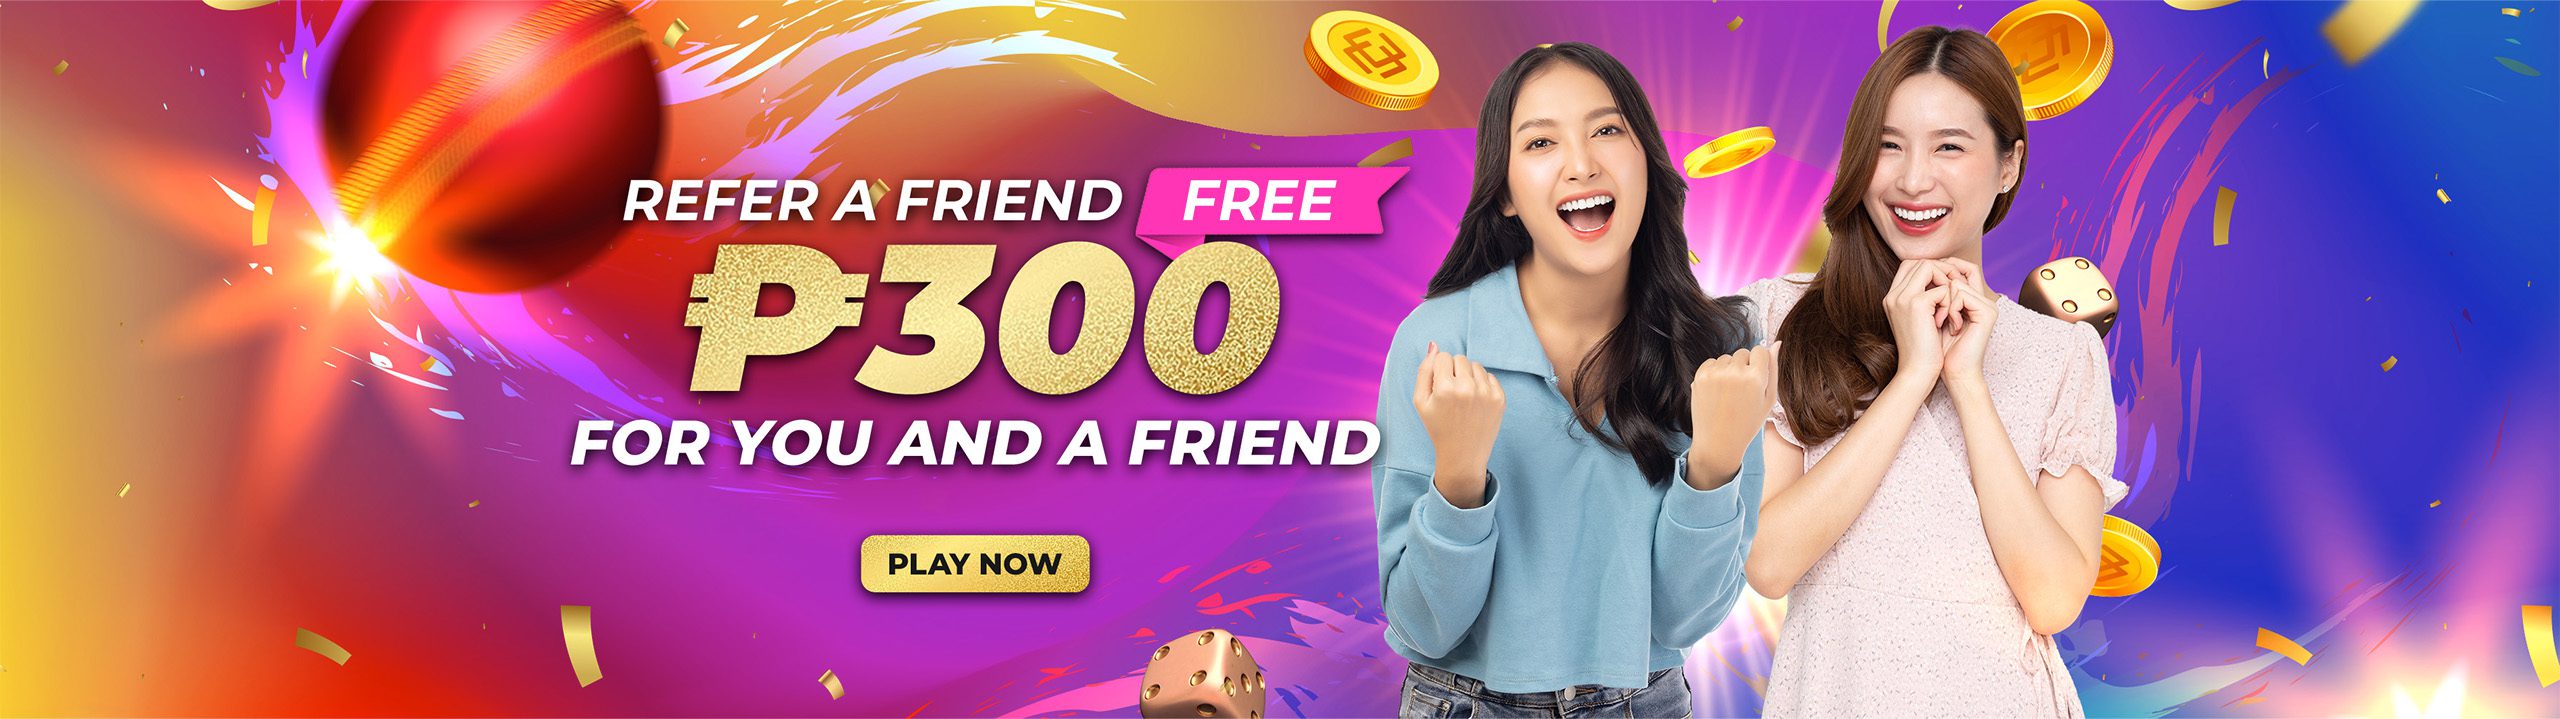 Refer A friend and get Free 300 PHP for you and A friend